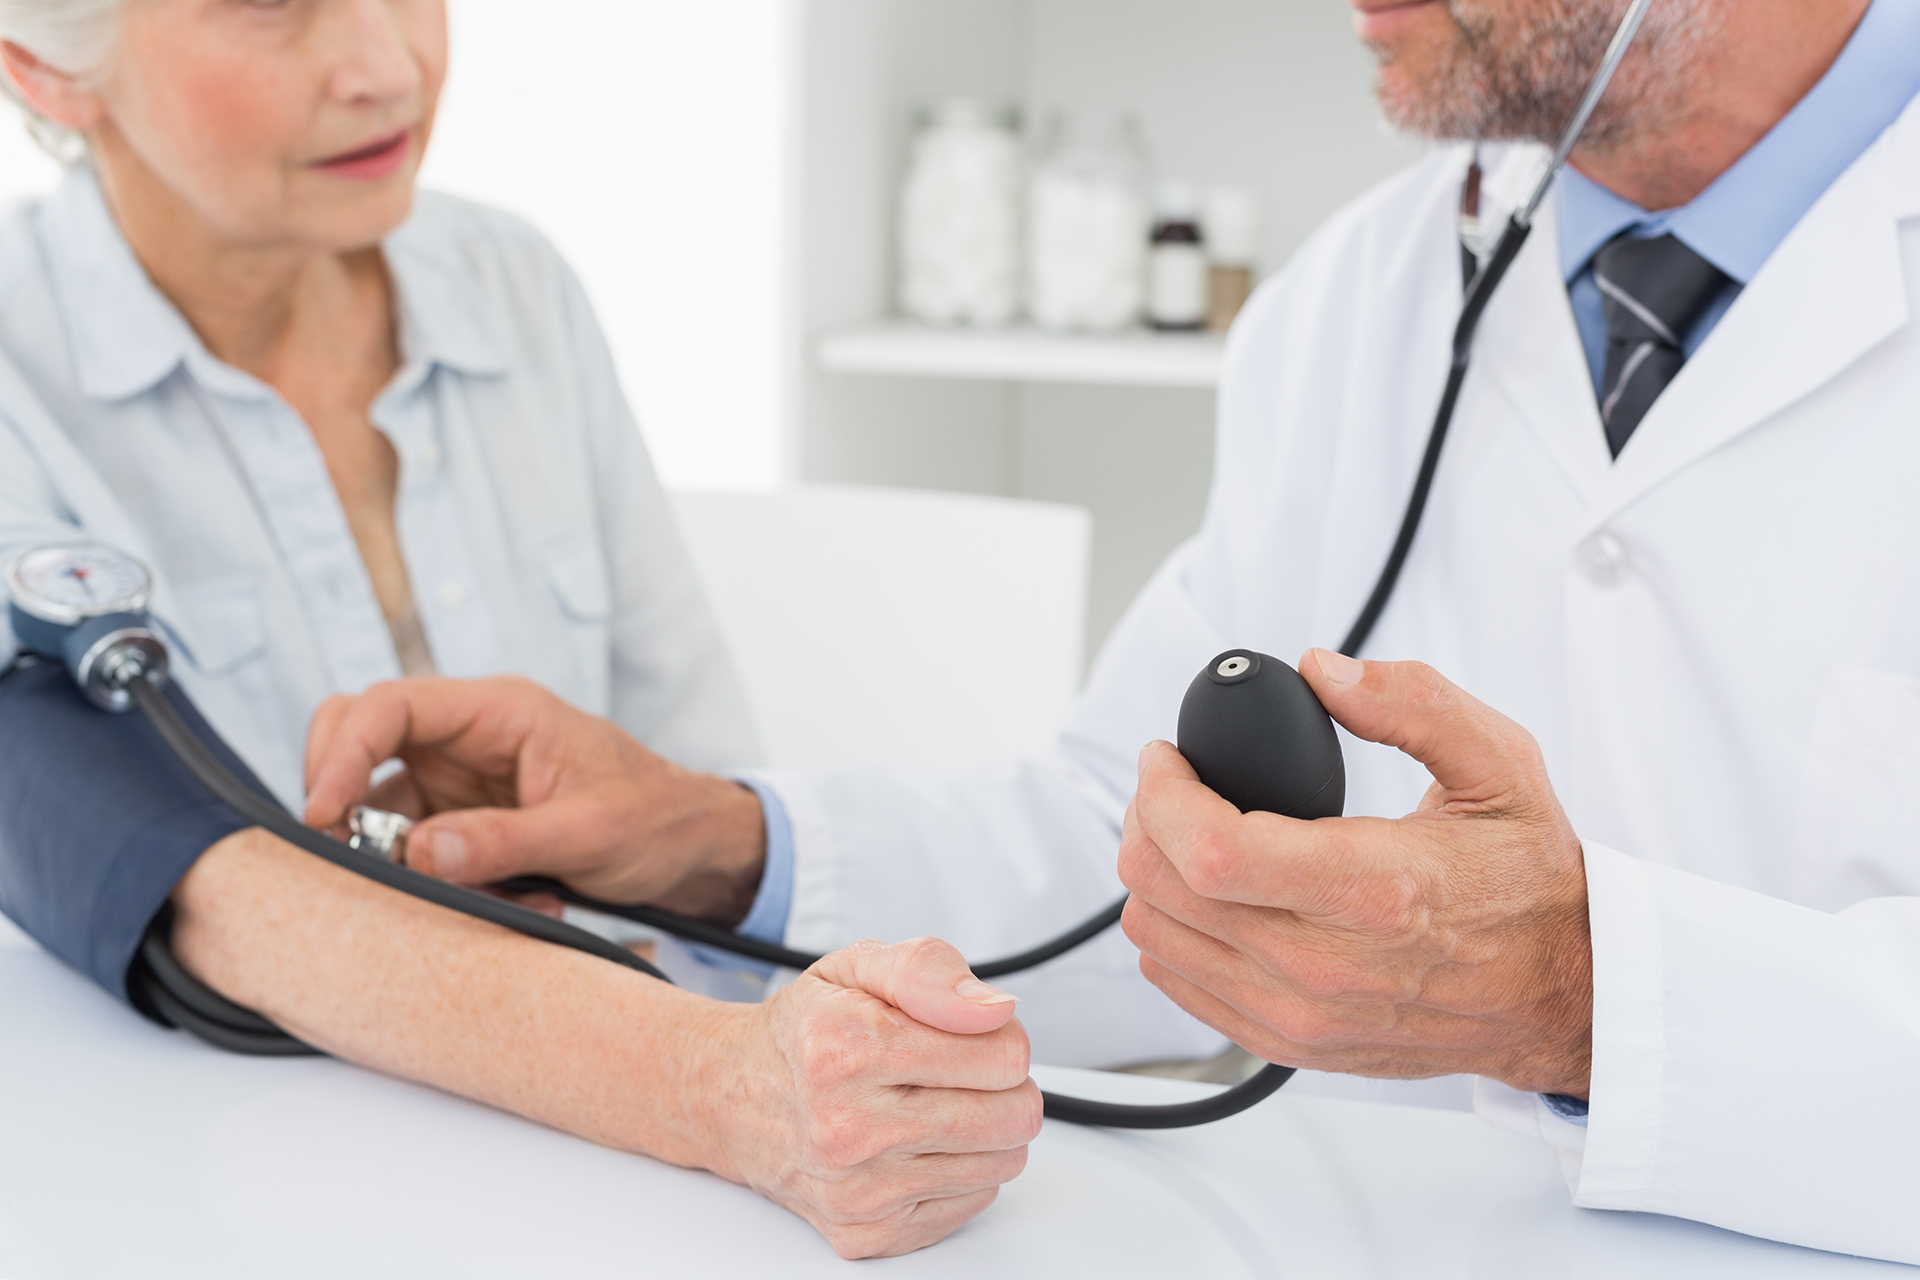 Diabetes: What do you need to know?